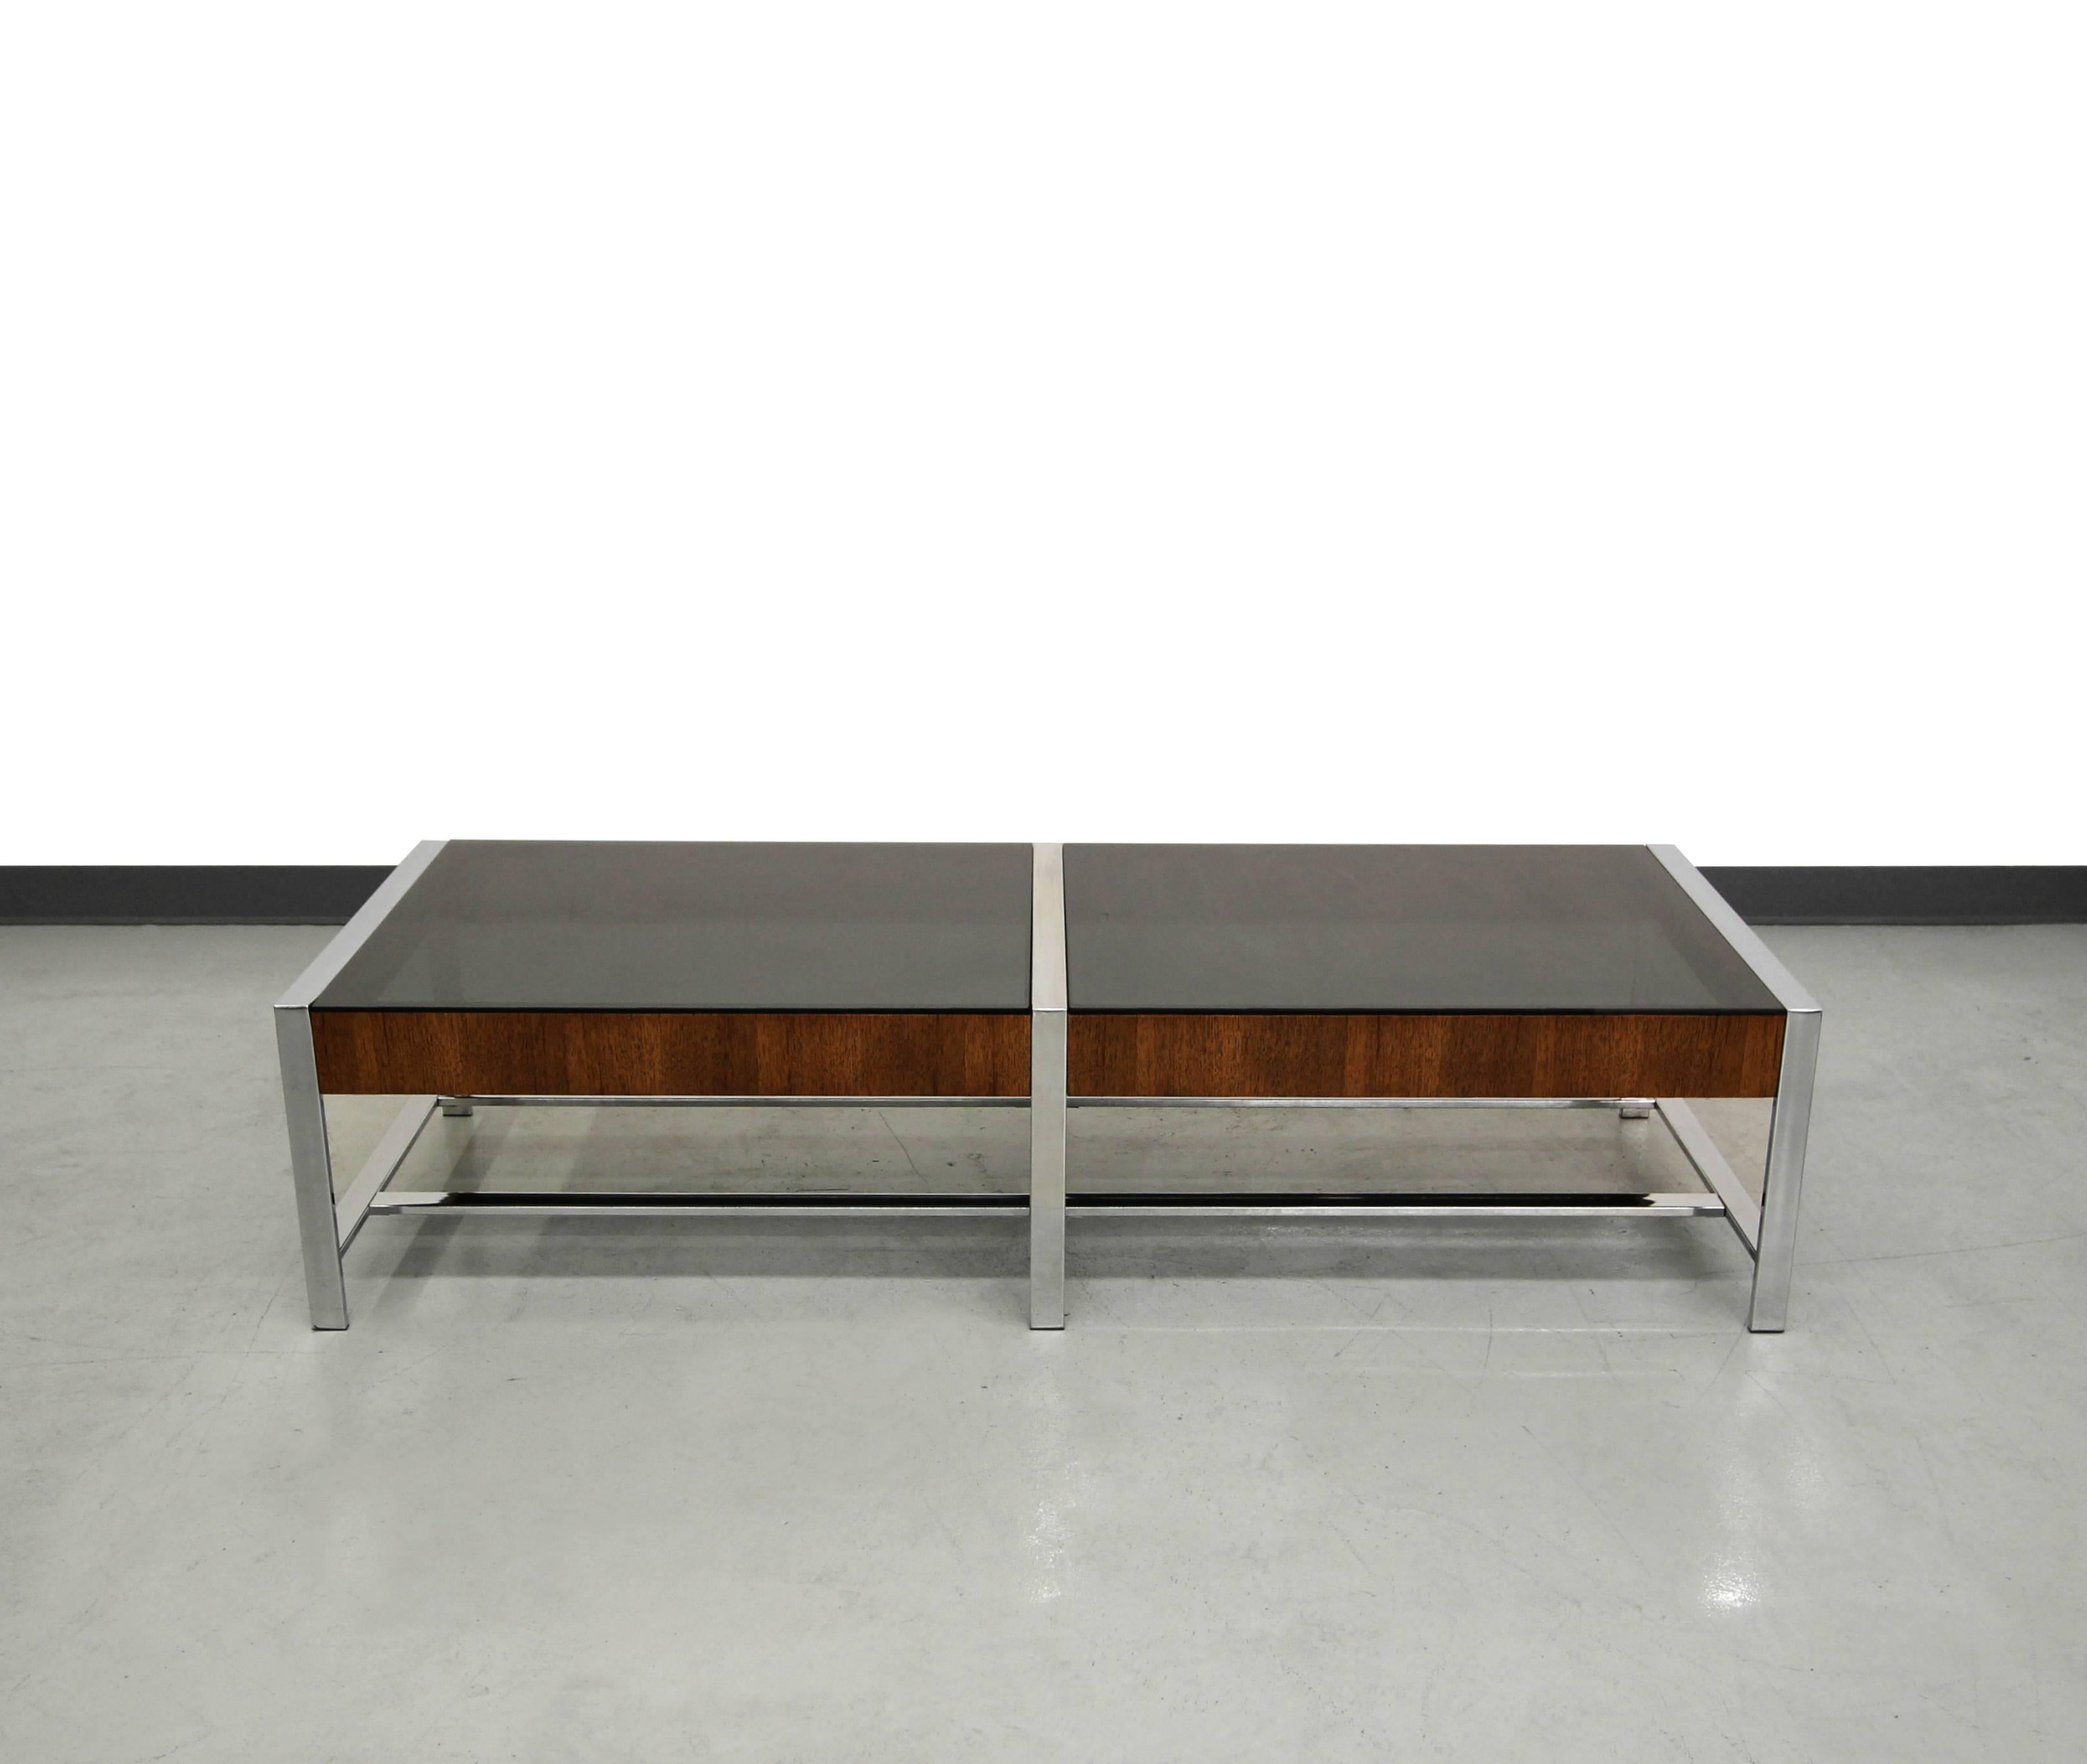 Modern and sleek designed Mid Century coffee table in the manner of Milo Baughman. Table features mirrored chrome framework with walnut details and smoked gray glass. Would look great meshed with modern or Mid-Century decor.